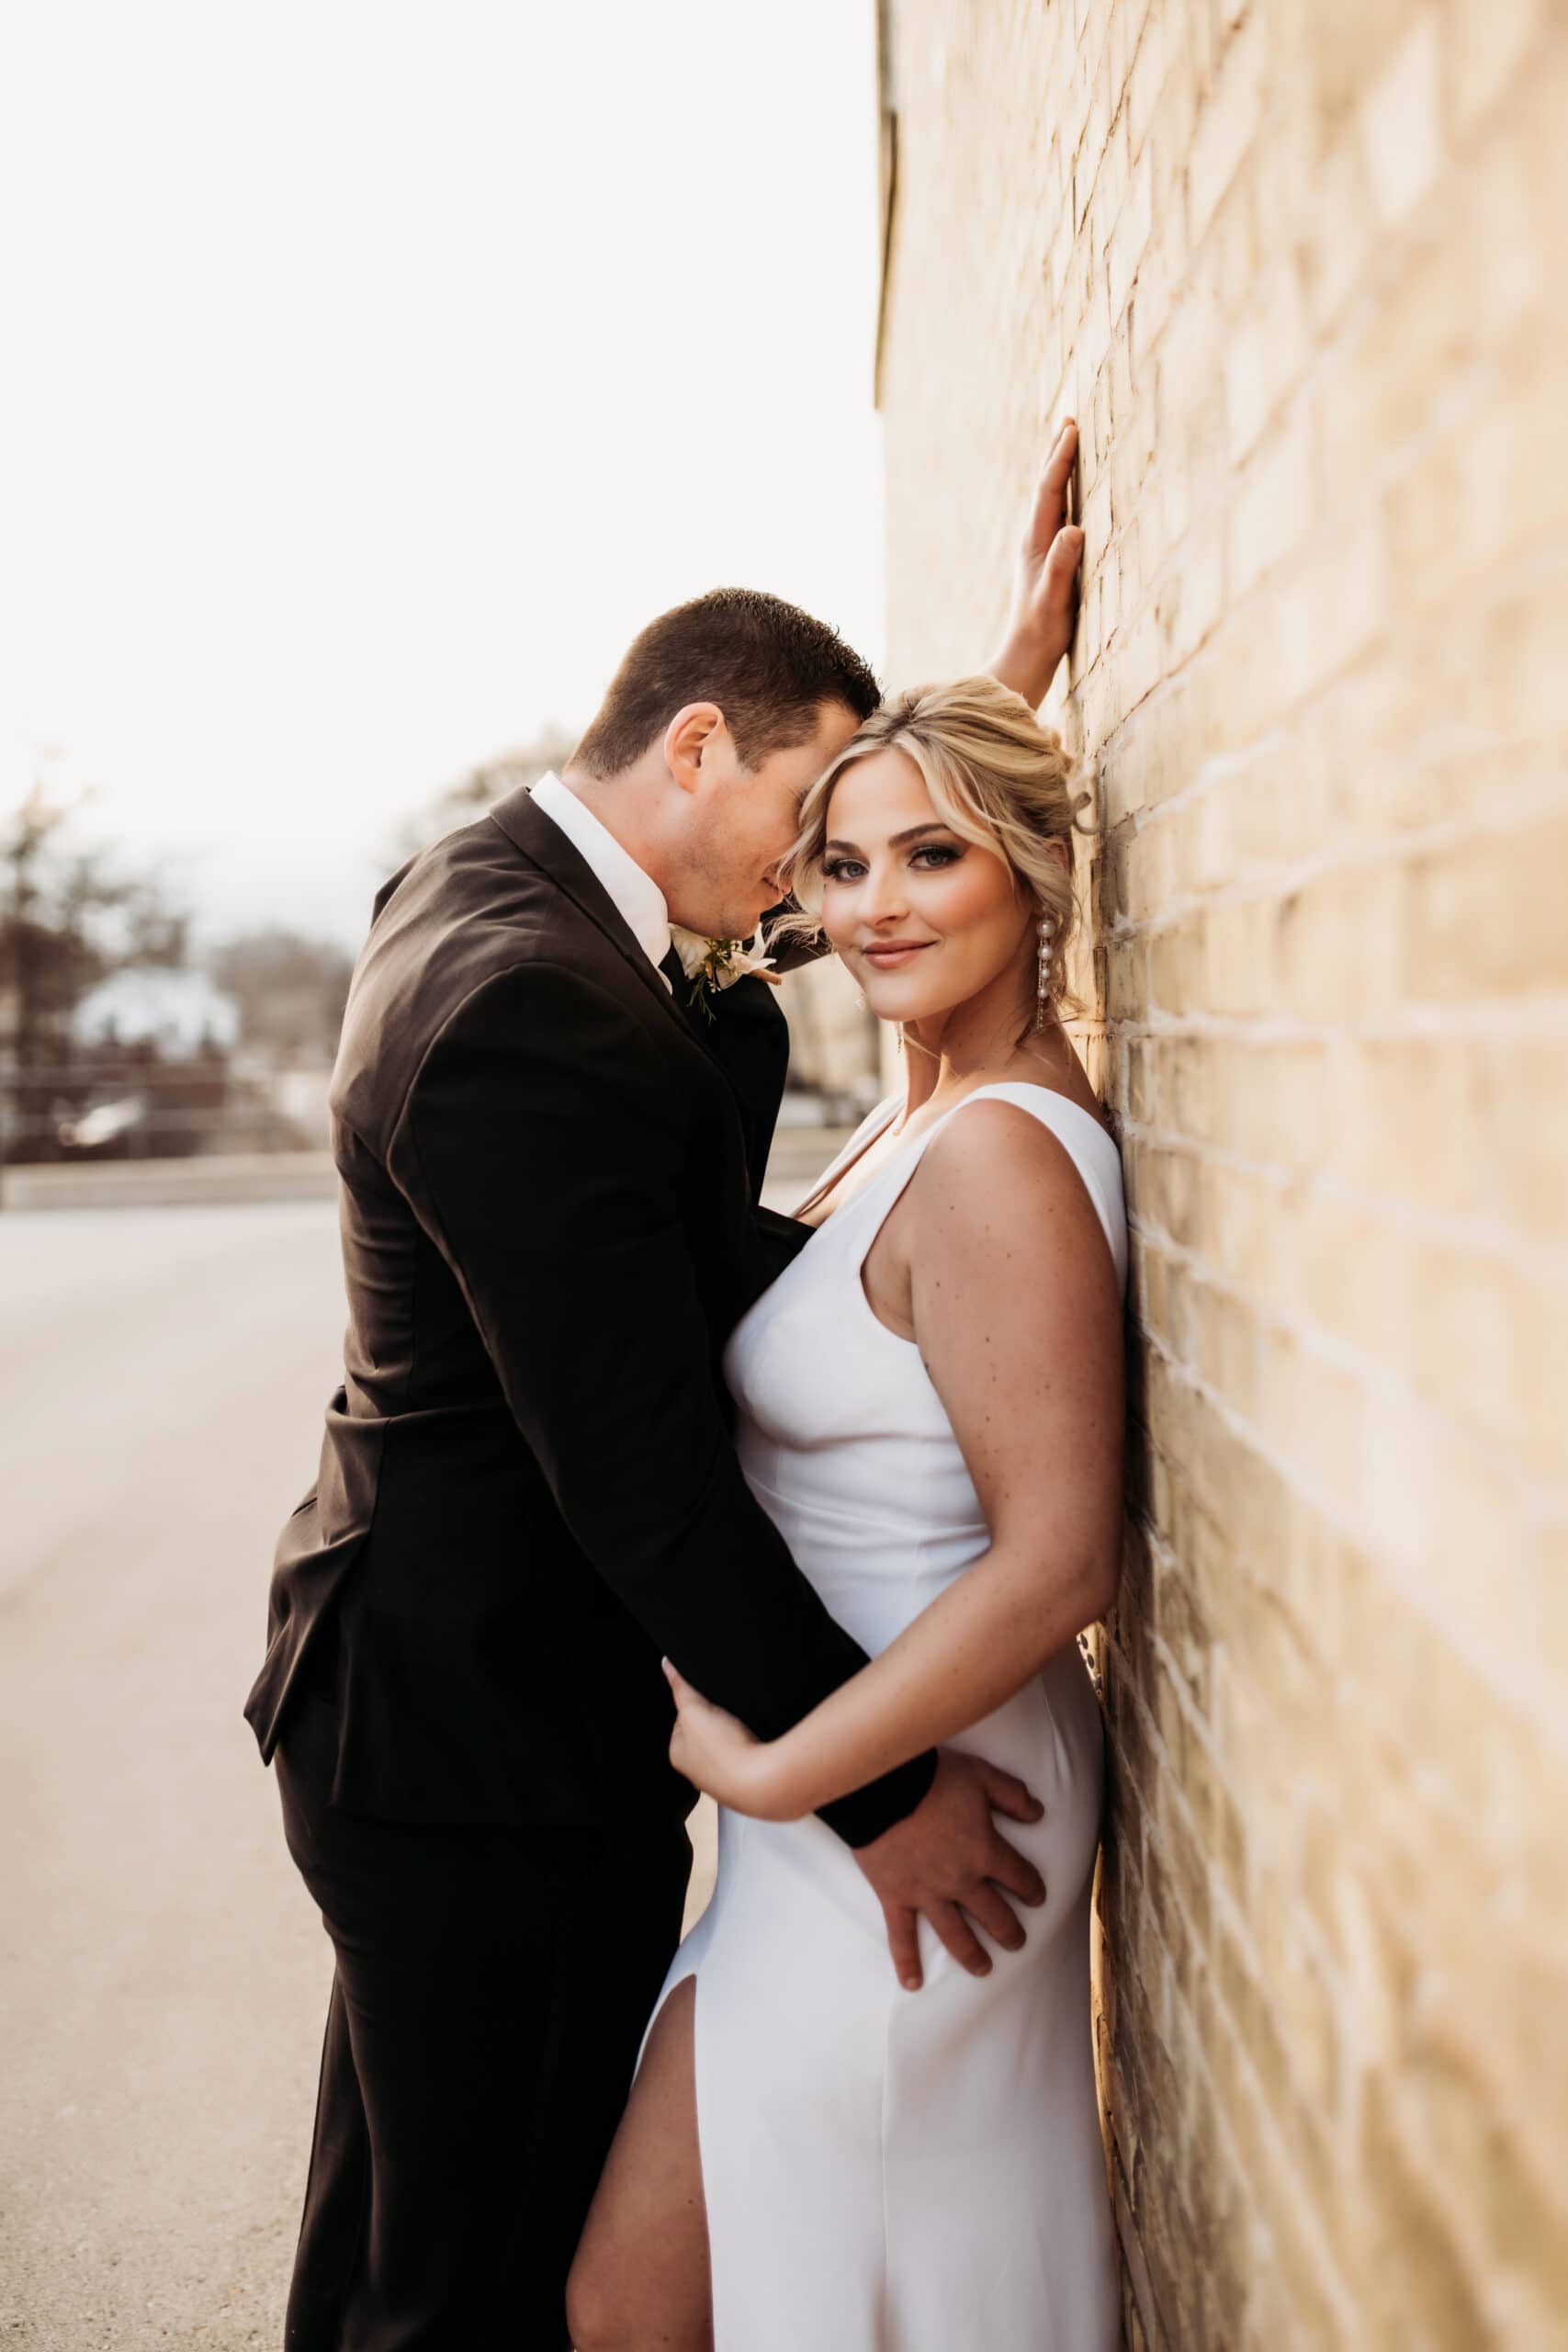 Wedding & Elopement Photography, Groom leaning over bride with his hand on the wall behind her